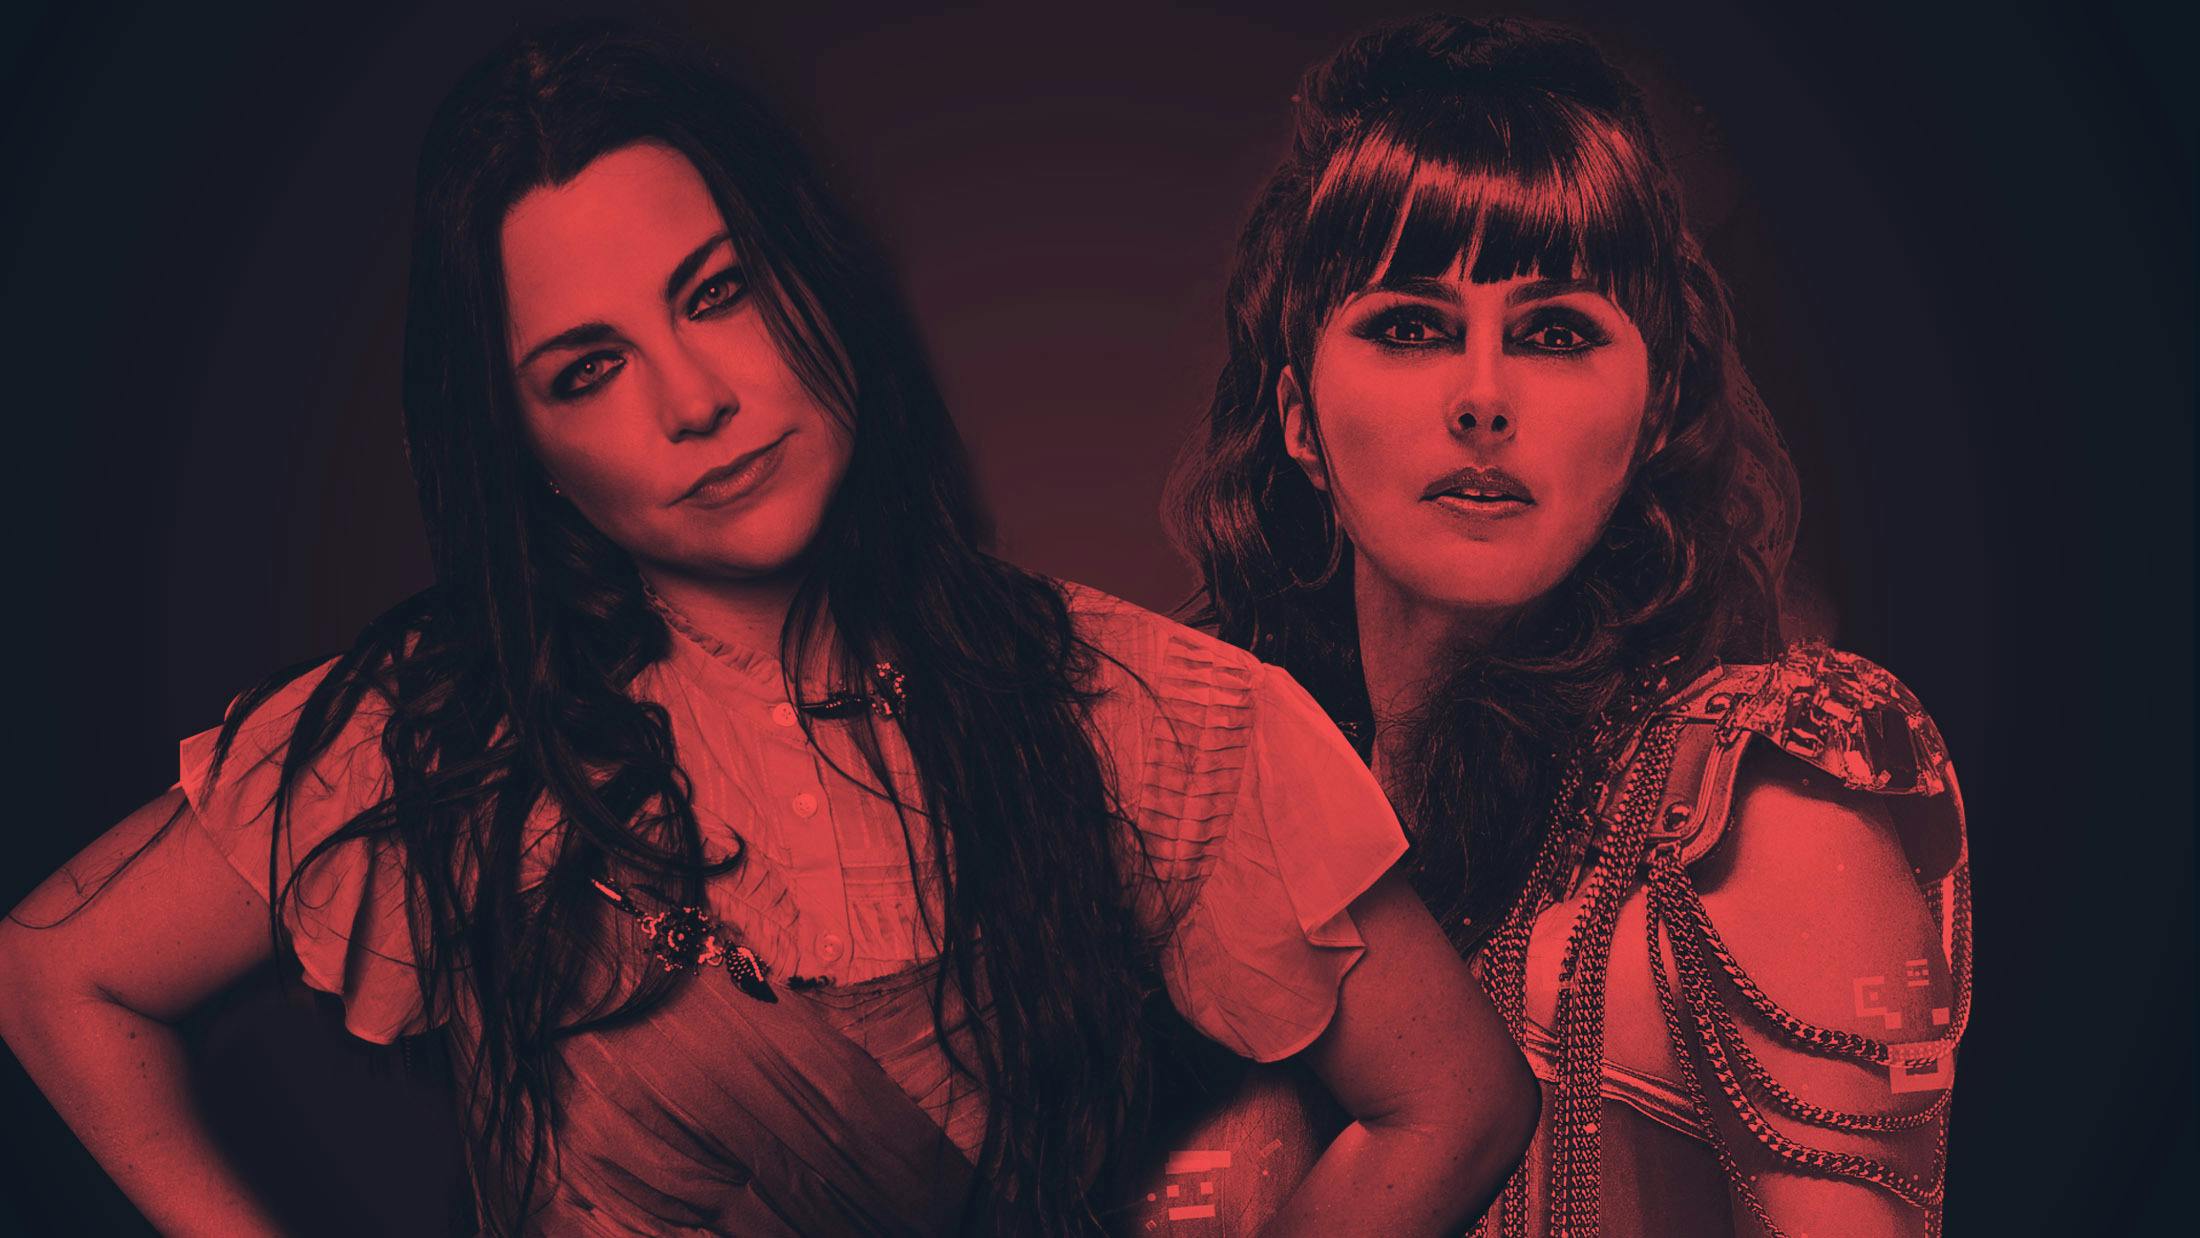 Evanescence And Within Temptation Add Extra Dates To Their Worlds Collide Tour – Tickets On Sale Now